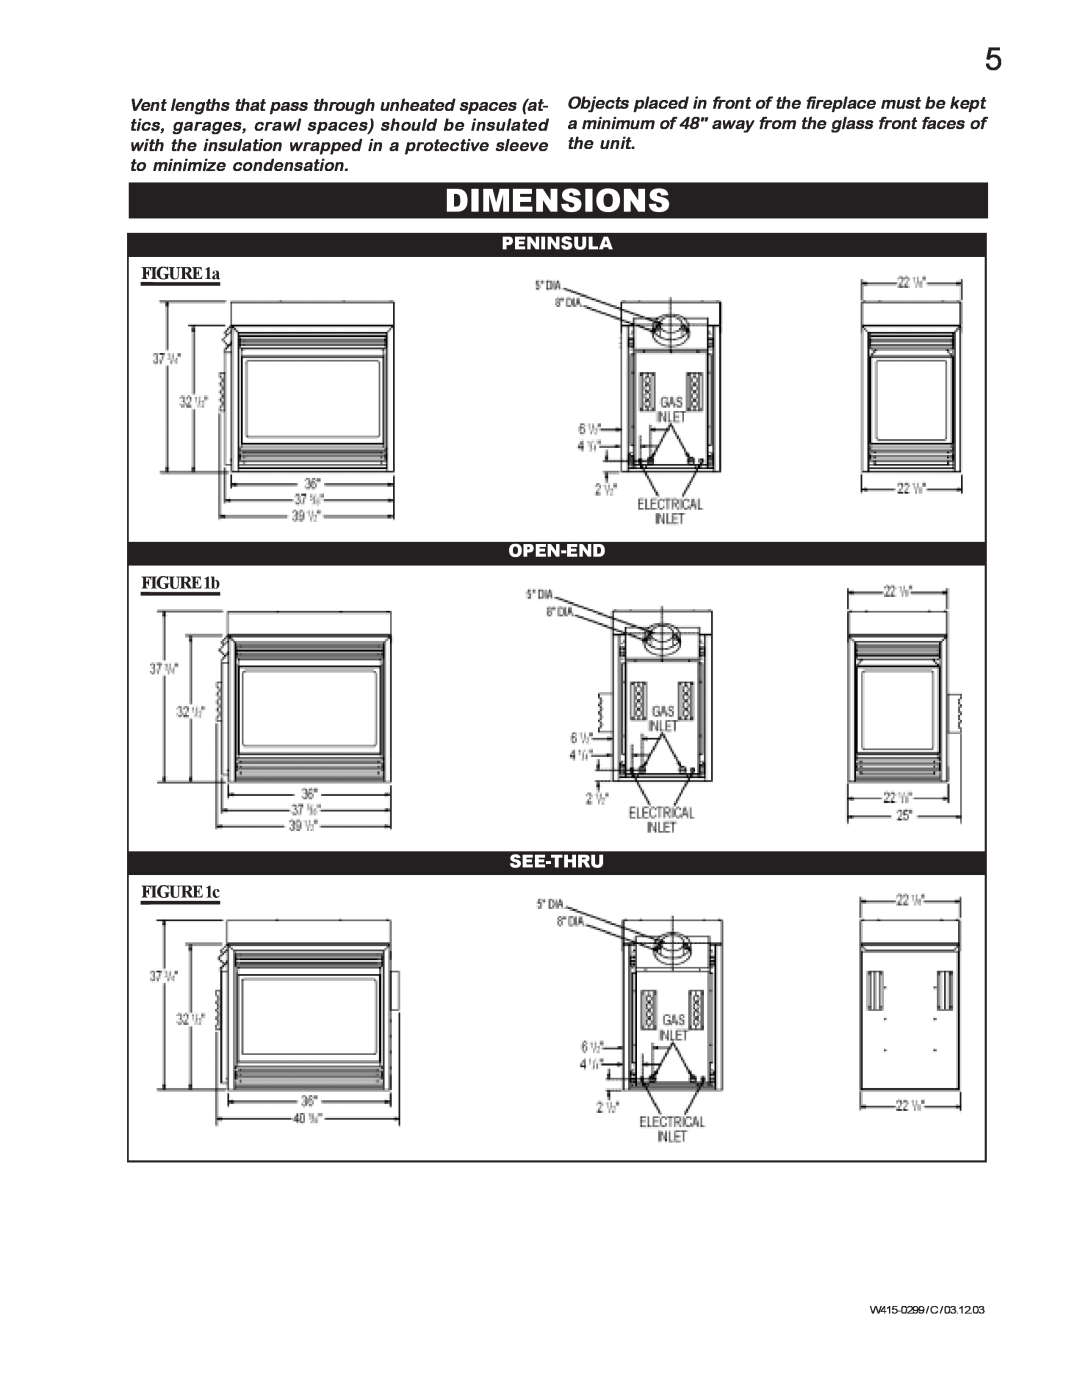 Napoleon Fireplaces BGD40-P, BGD40-N manual Dimensions, Peninsula, Open-End, b, See-Thru, c 